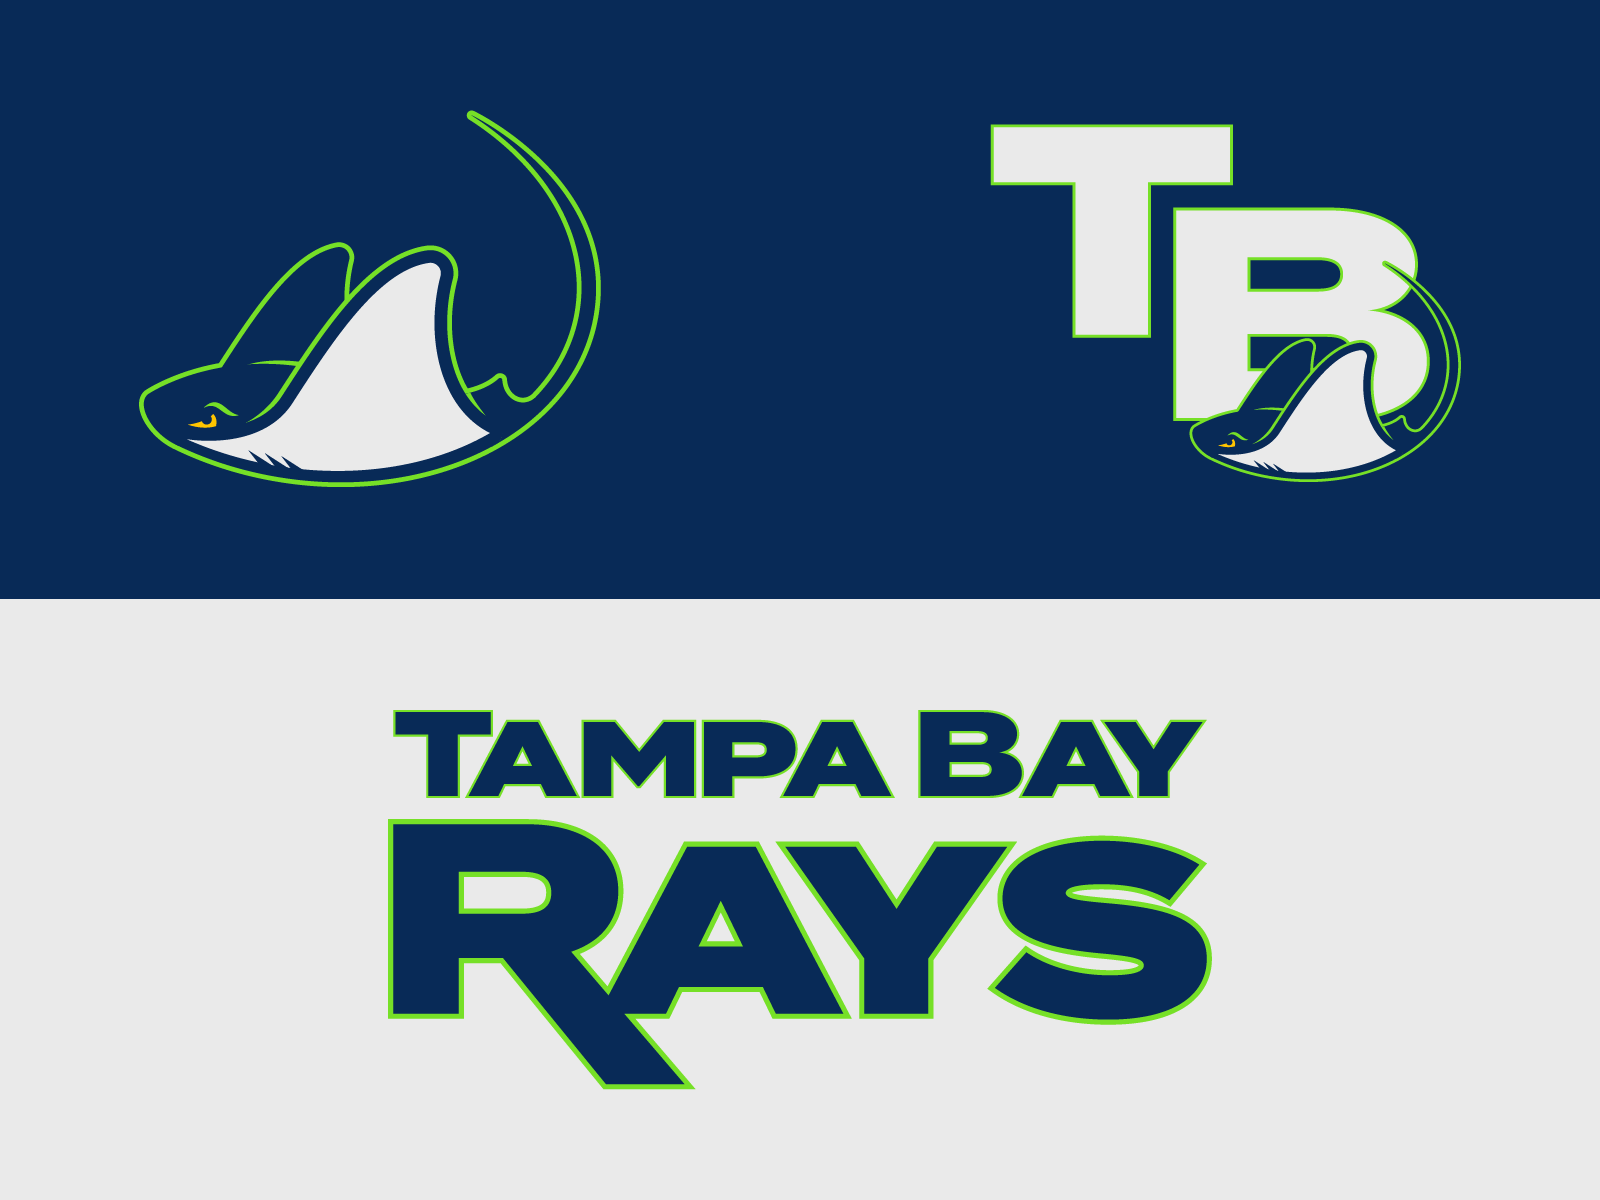 Tampa Bay Rays Refresh Uniforms by Michael Danger on Dribbble